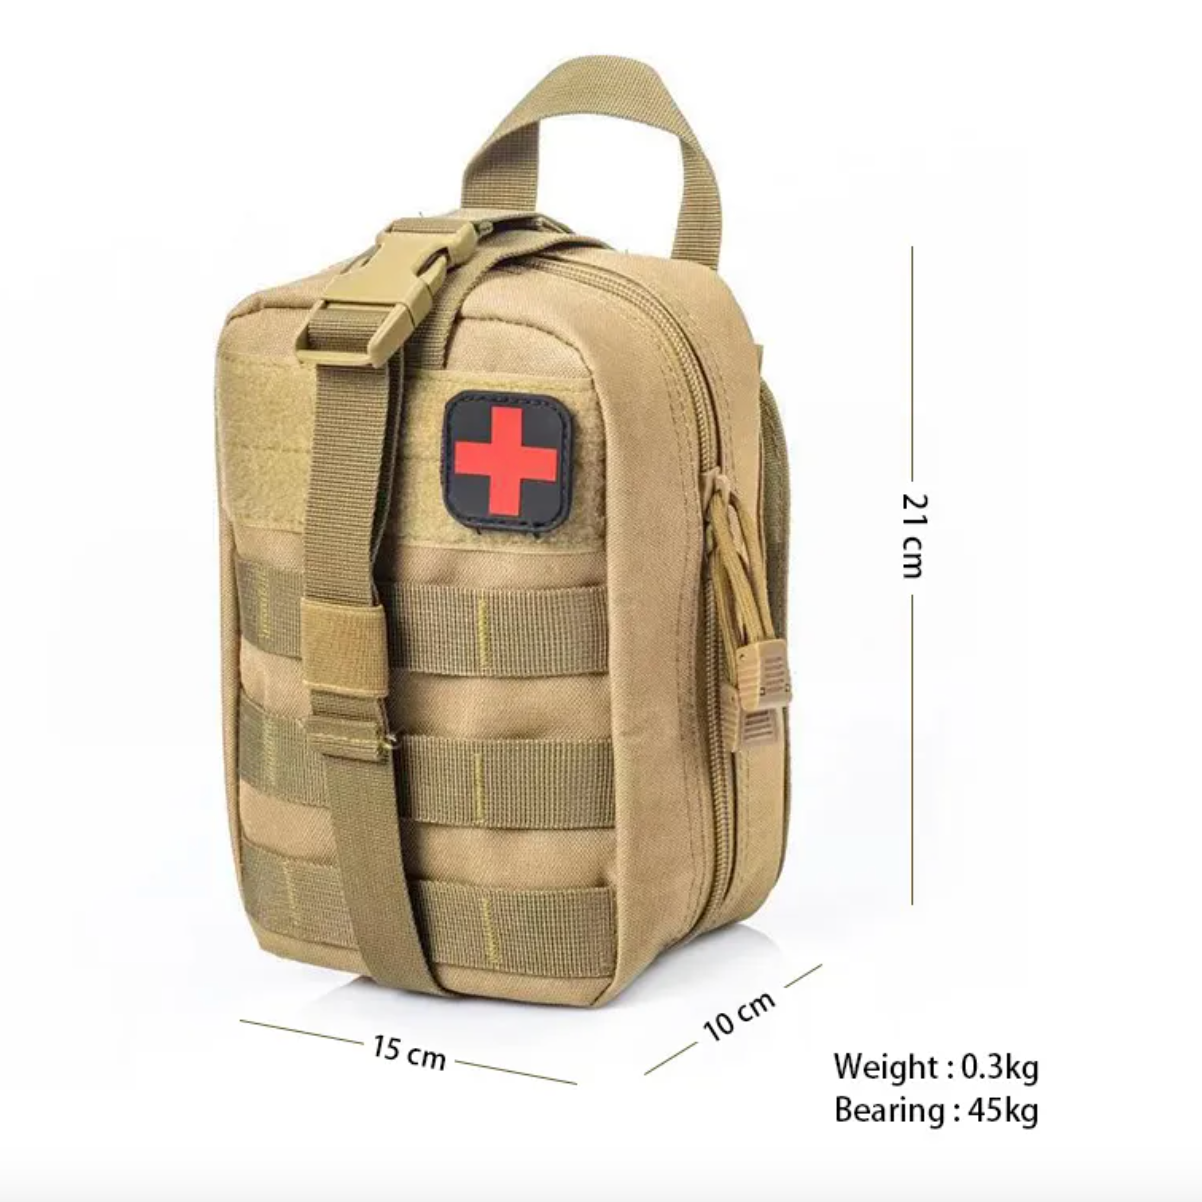 Tactical Medical Accessory Bag with Patch - Orange - RPI Supplies